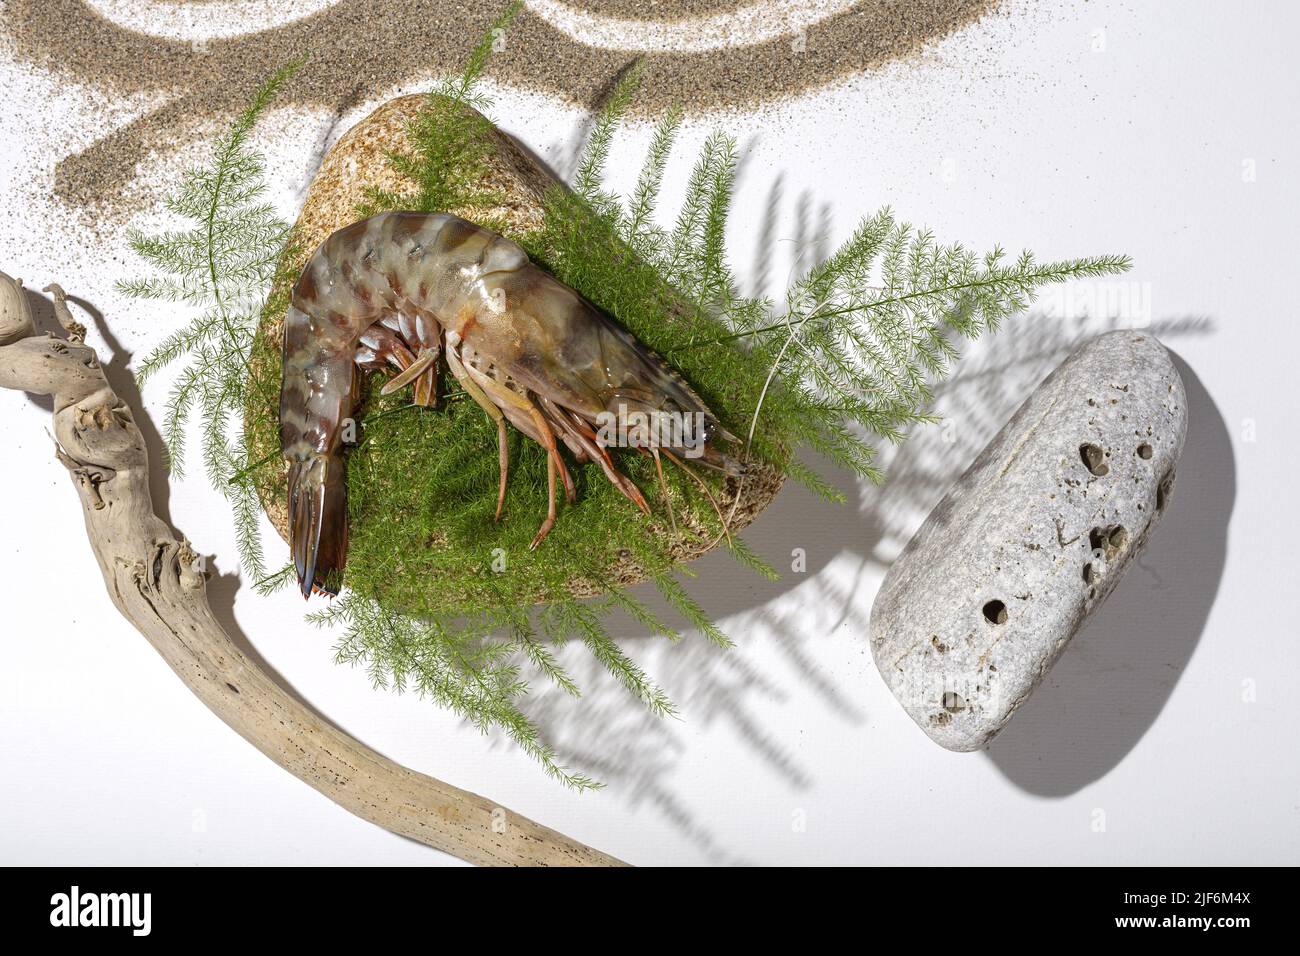 Top view of palaemon serratus shrimp placed on rock and green fern twig near dry sand and stick on white background Stock Photo